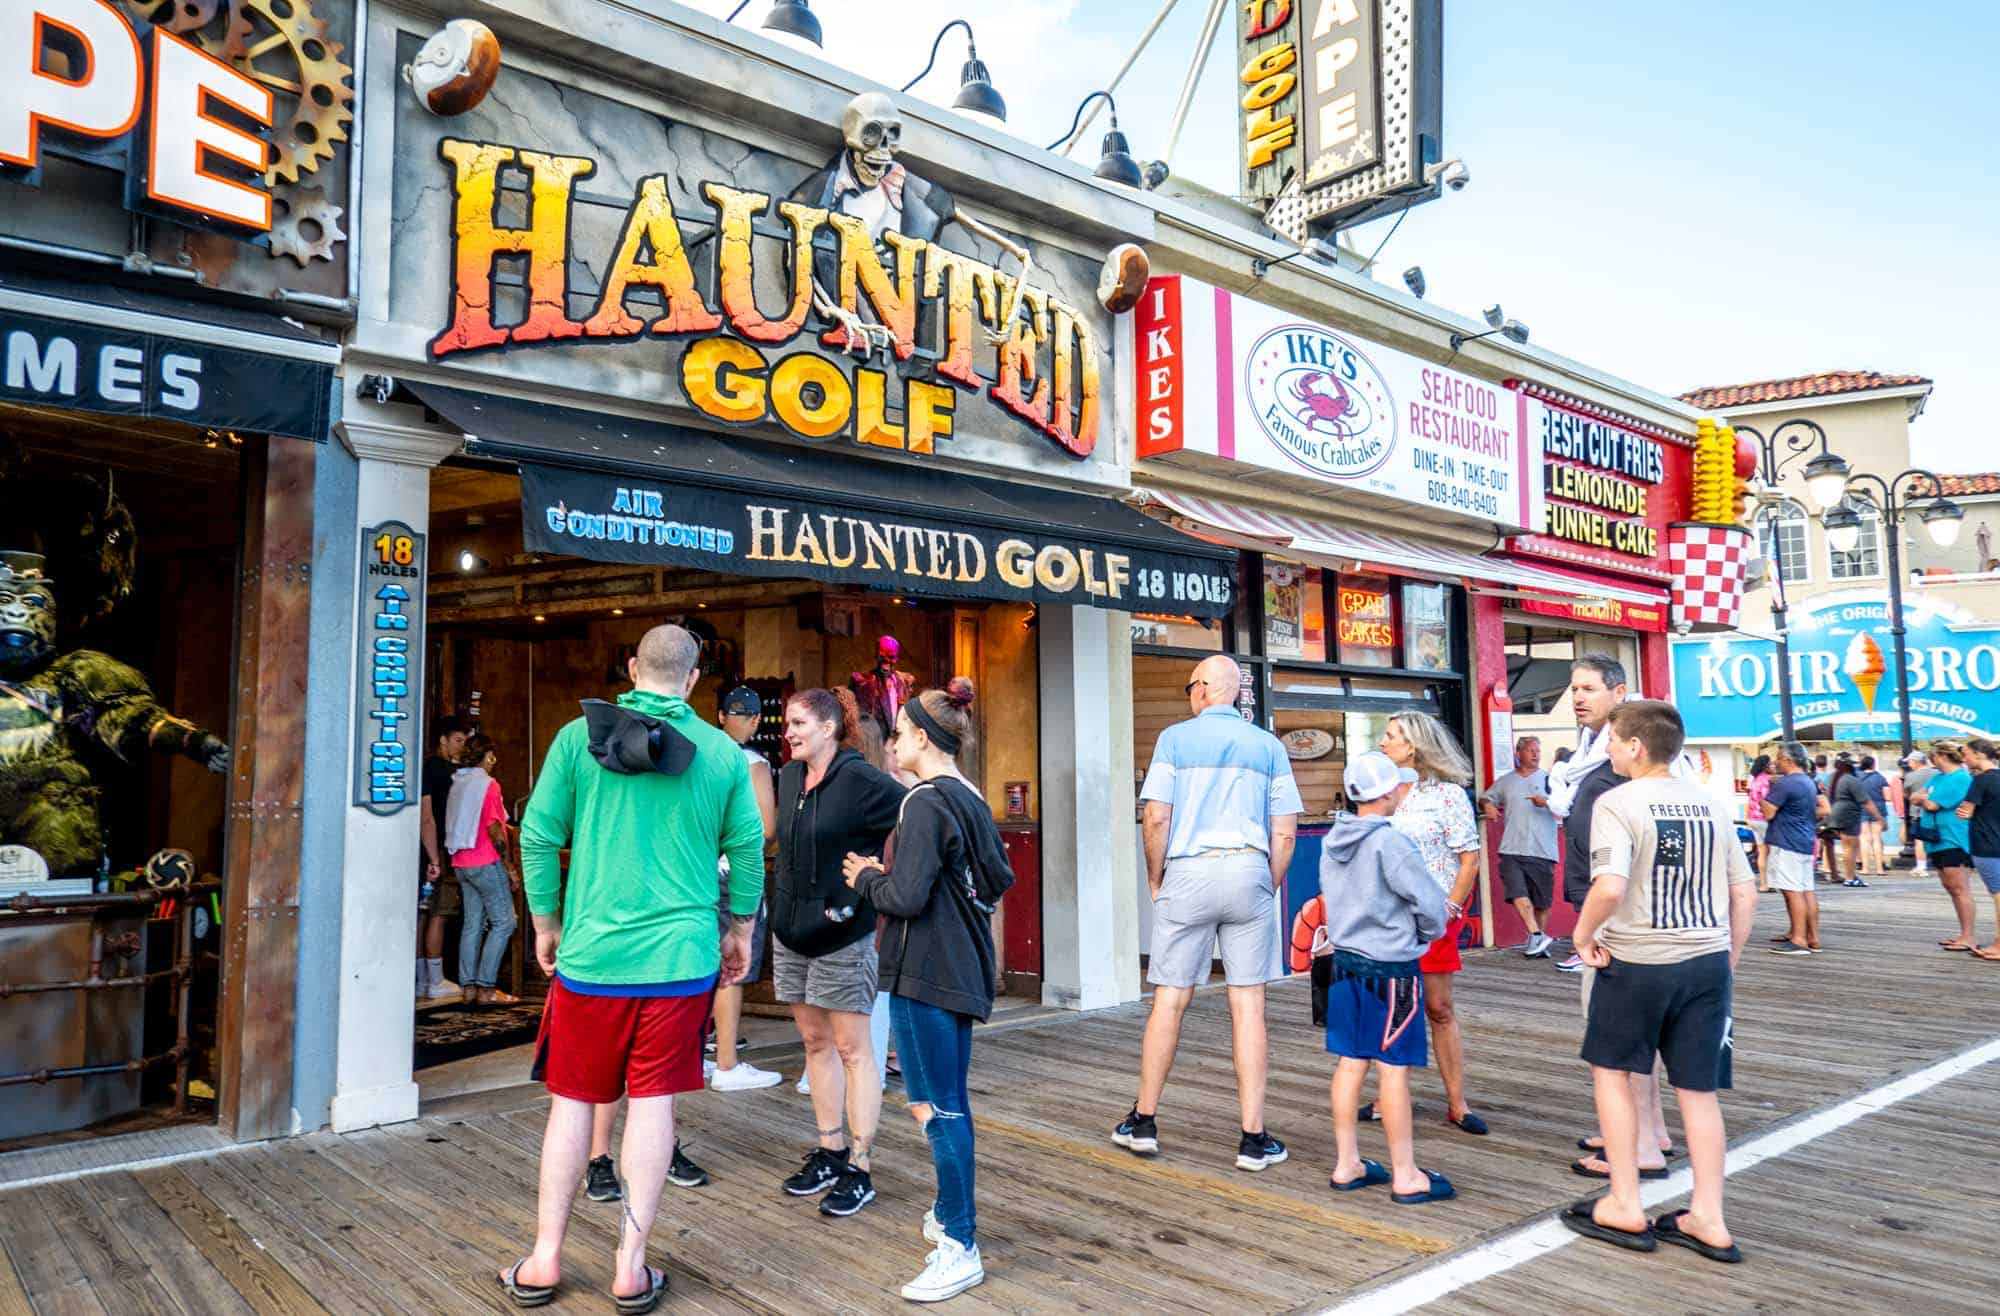 People standing on the boardwalk outside a storefront with a sign for "Haunted Golf"